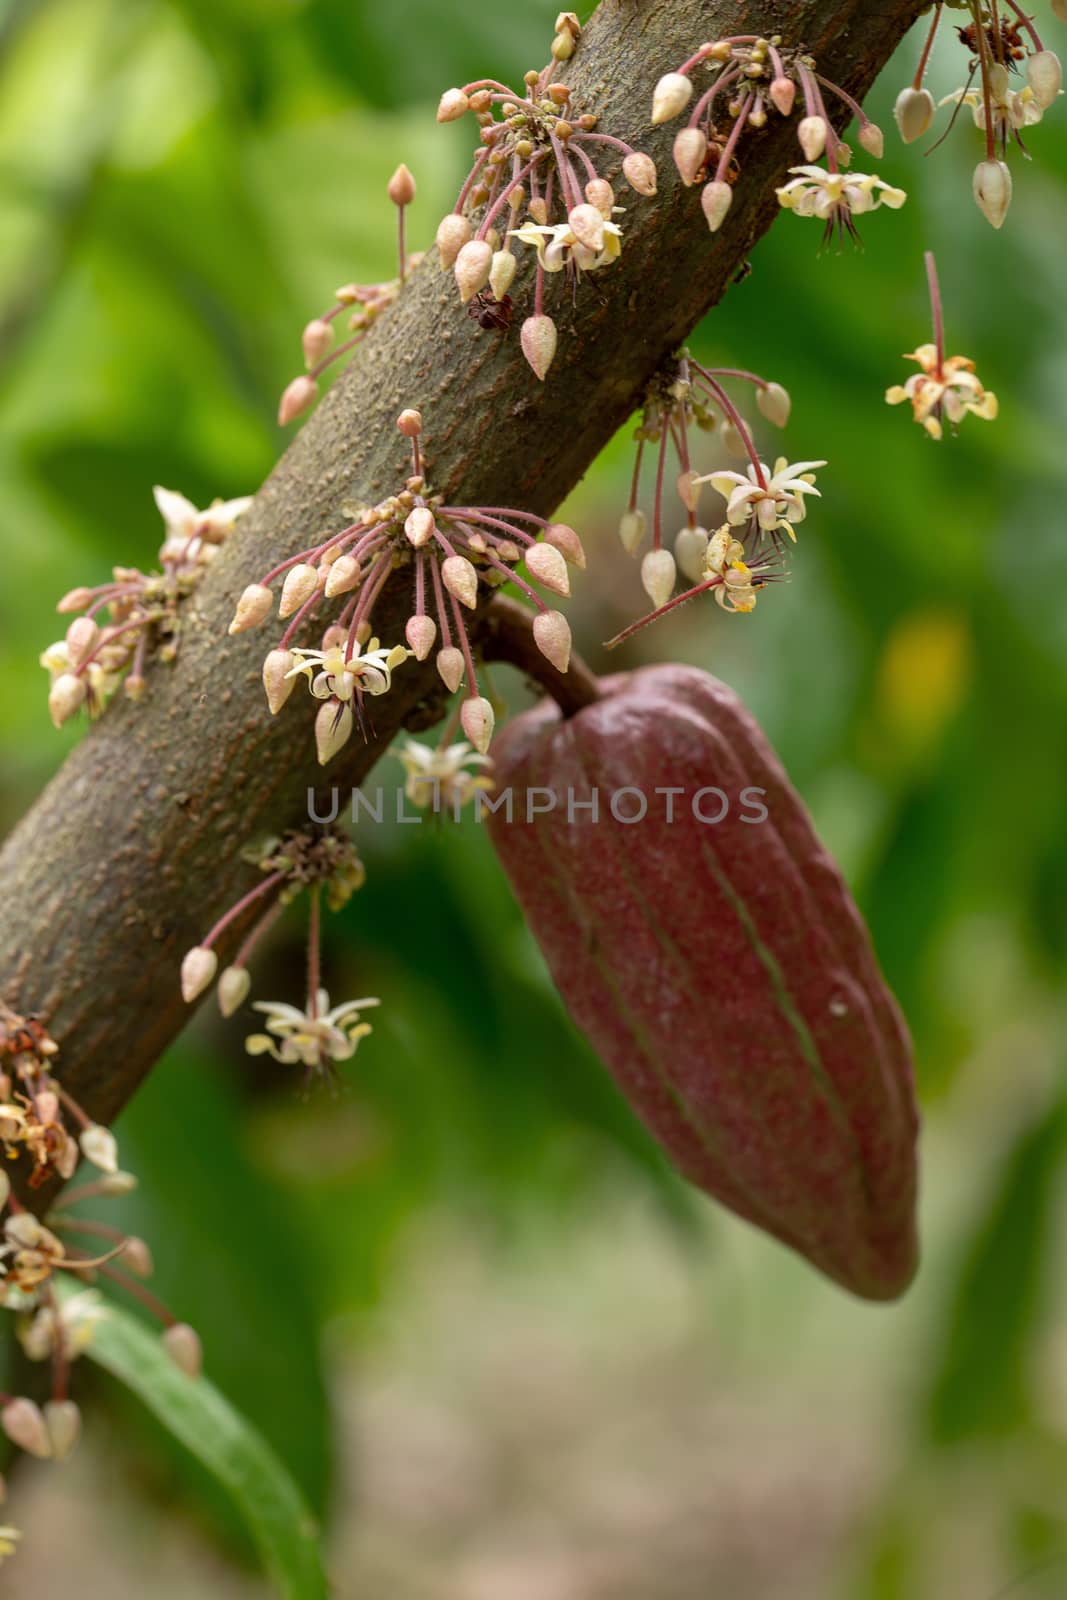 Cocoa flowers, Cacao fruit, Cocoa pod on tree by kaiskynet